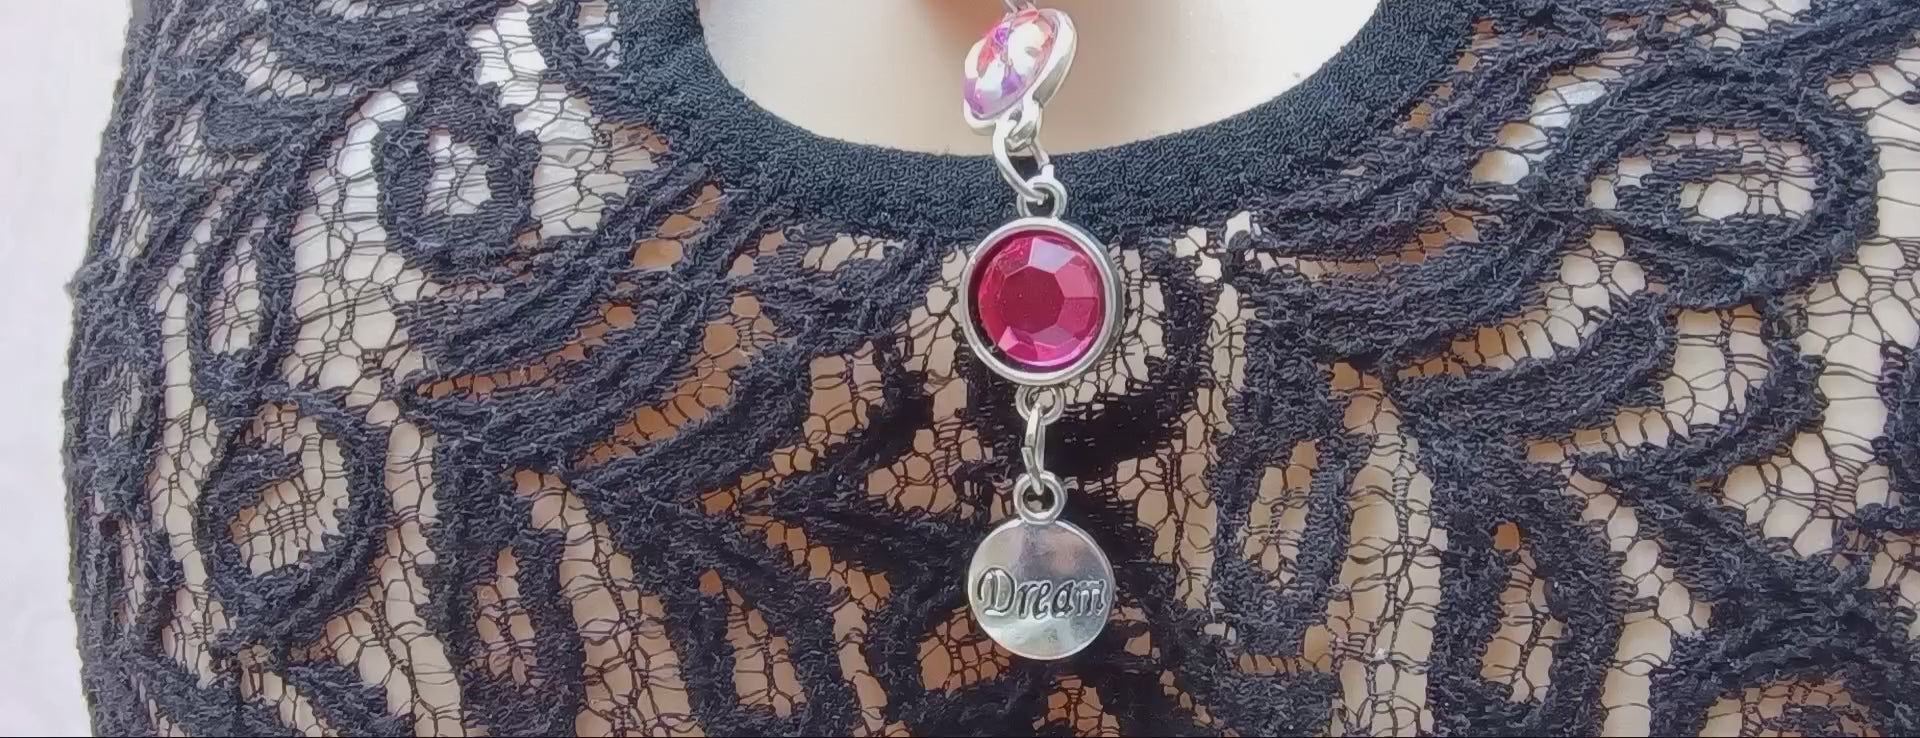 Load video: Short video showing lace back of bikini panties with keyhole detail and a pendant with a &#39;dream&#39; charm.